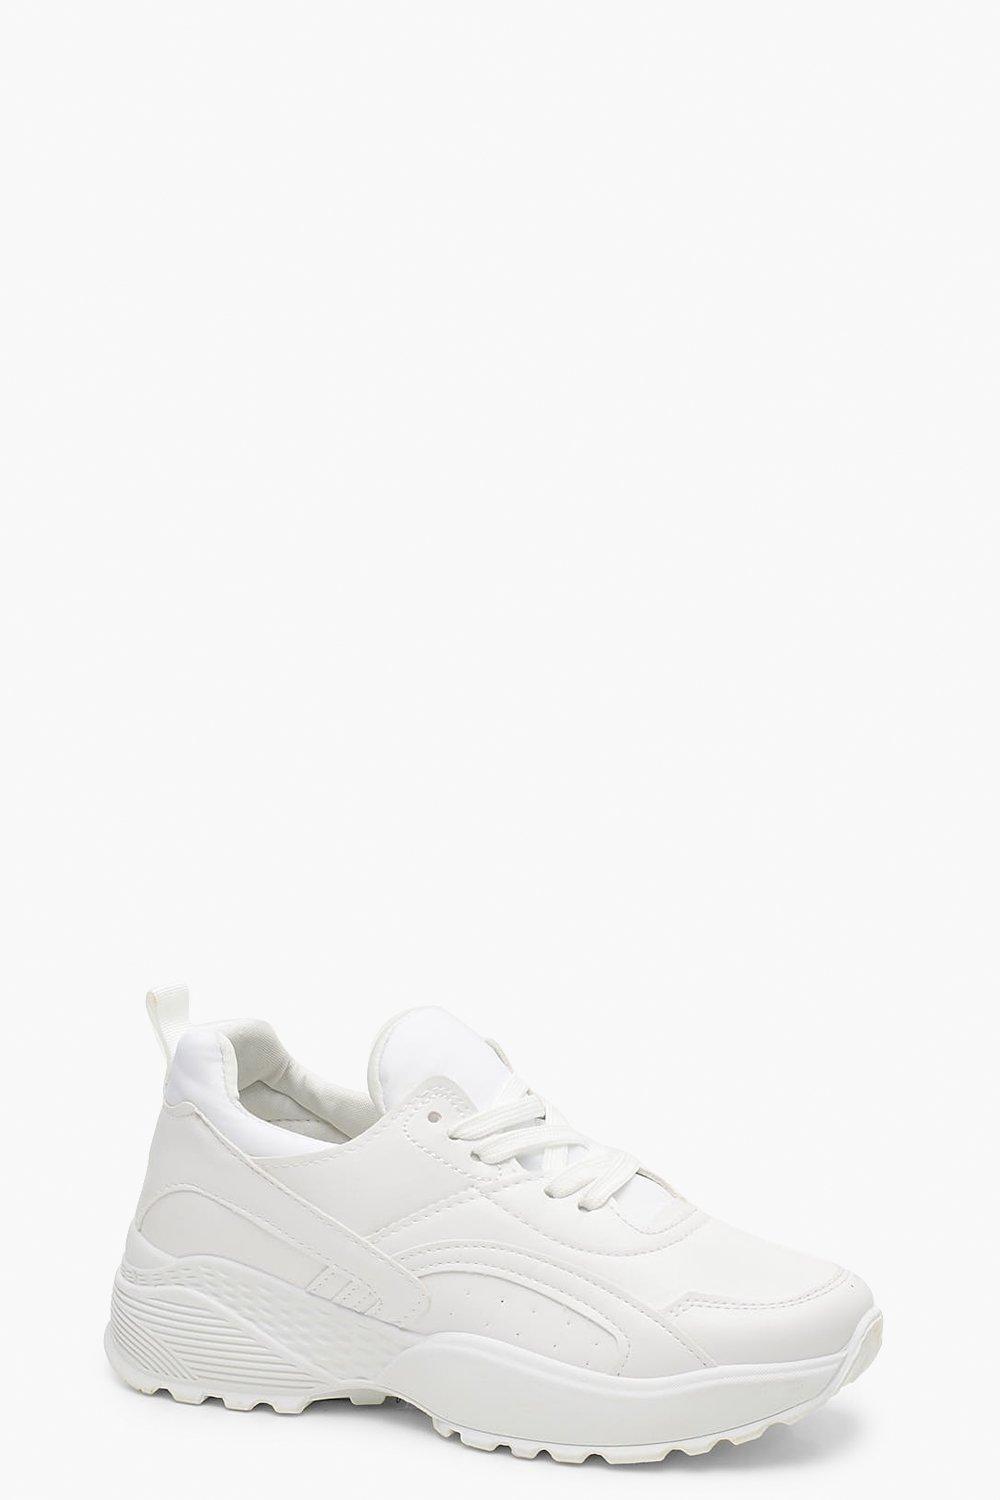 chunky dad sneakers womens